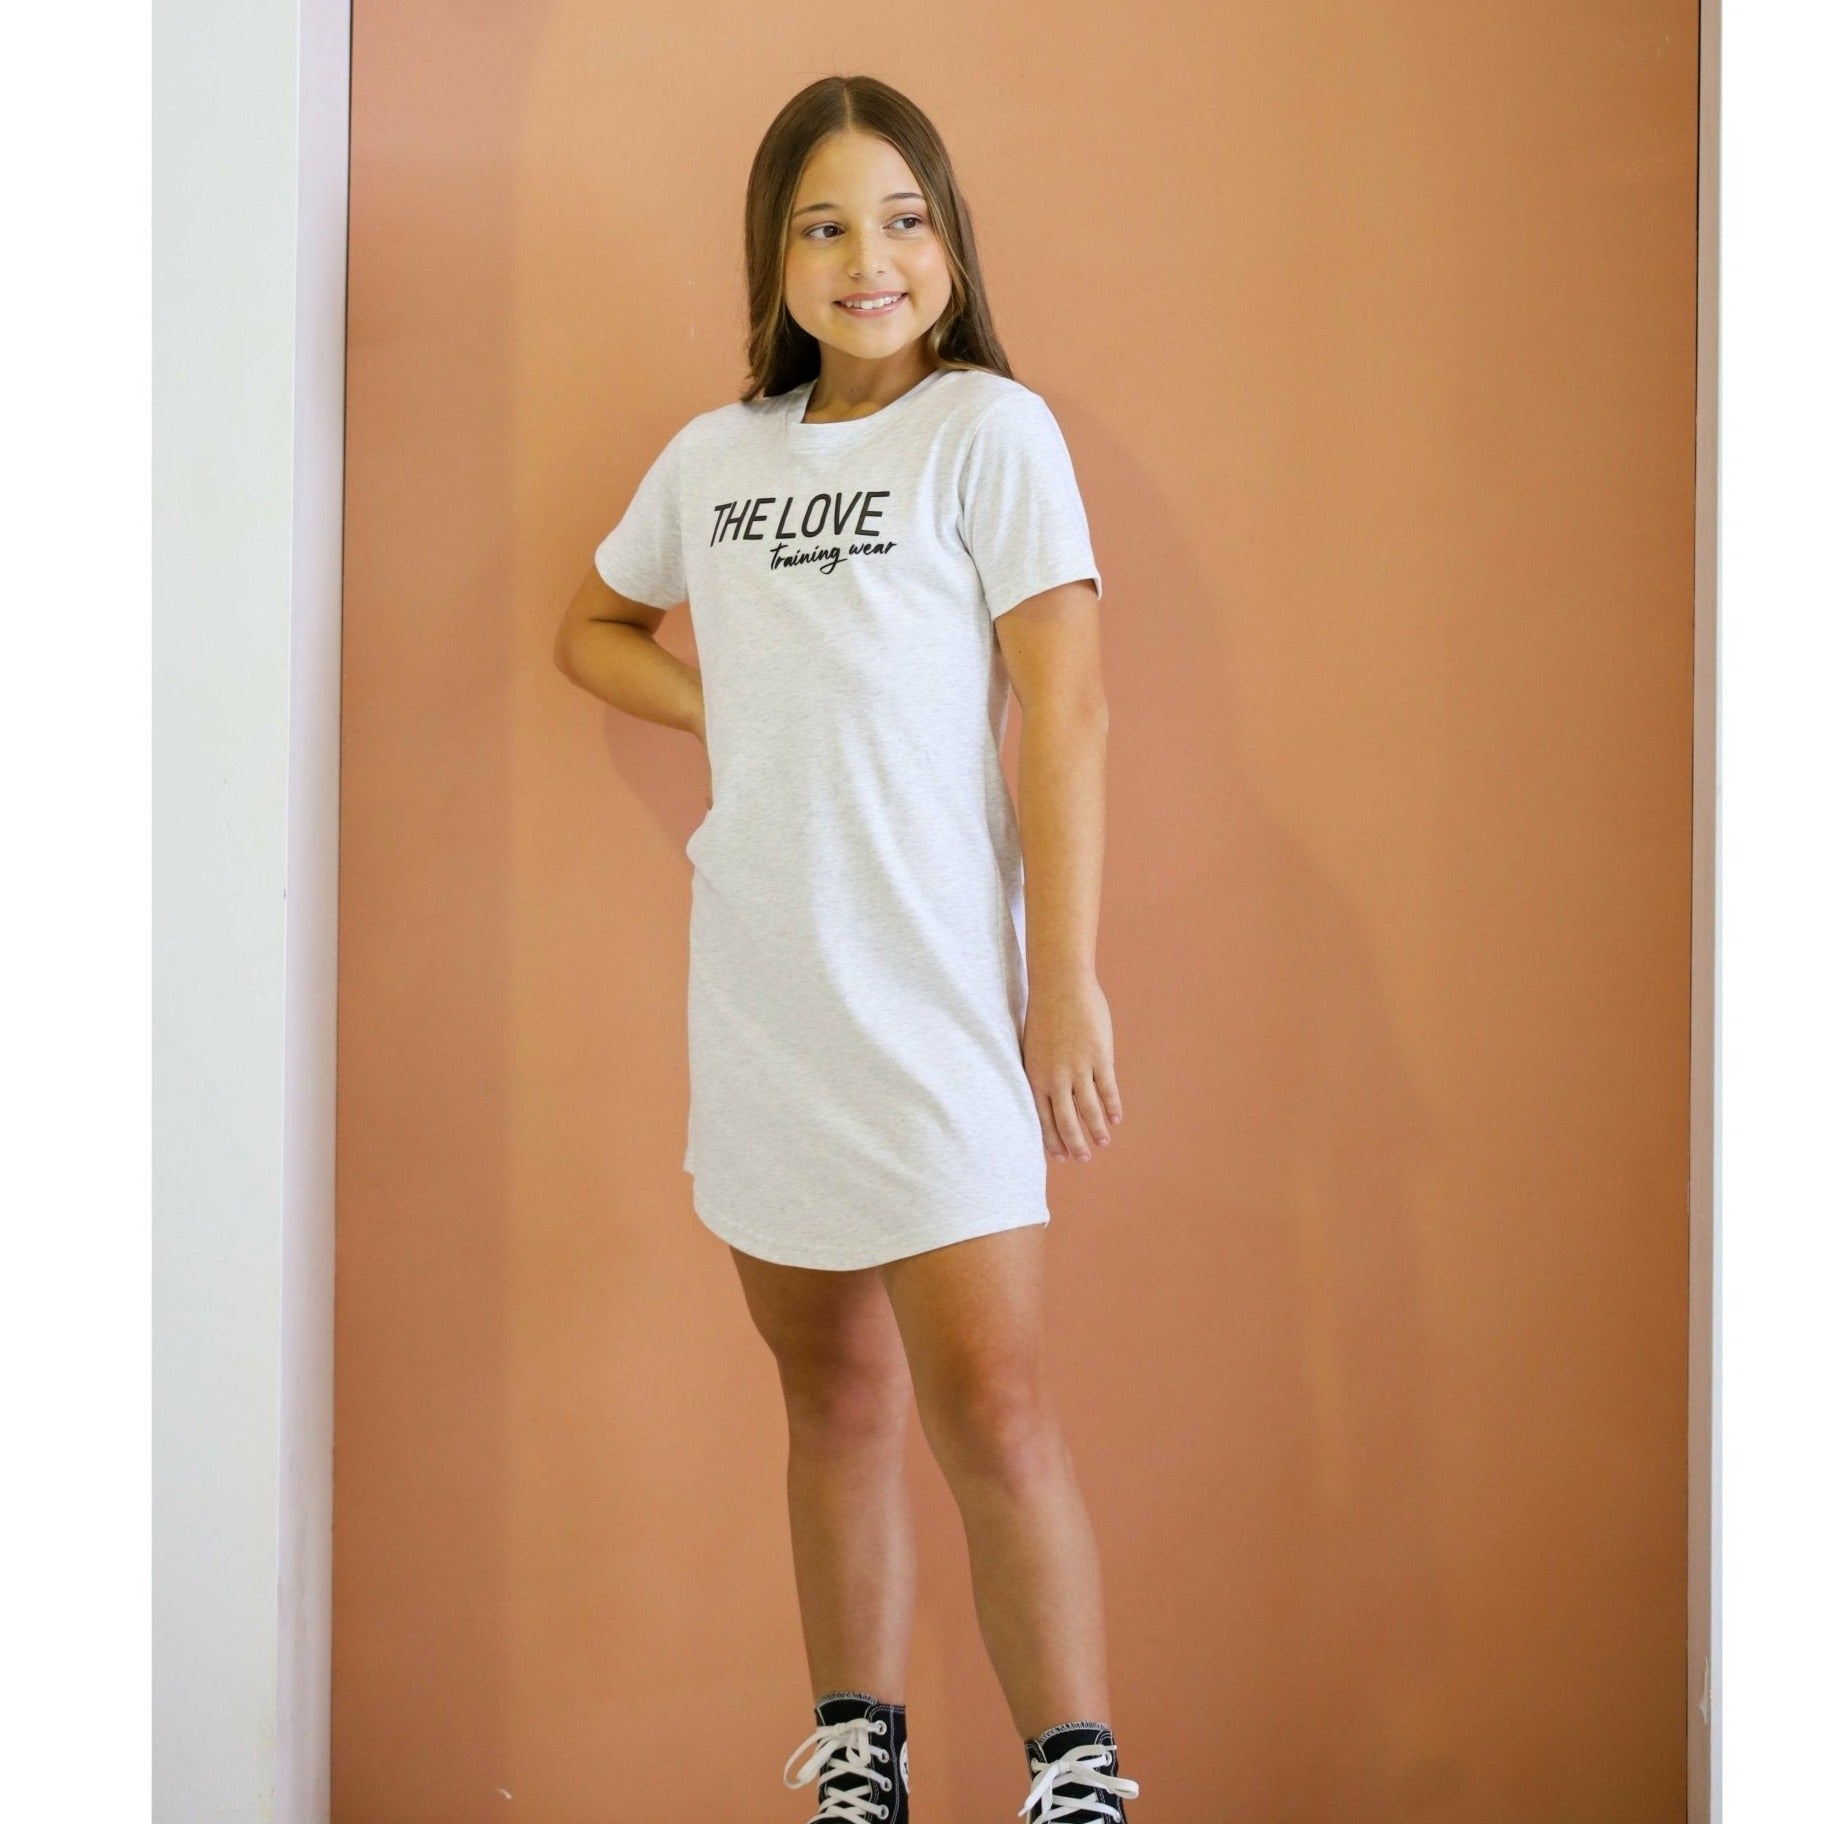 White T-Shirt Dress. The perfect casual dress. – The Love Training Wear